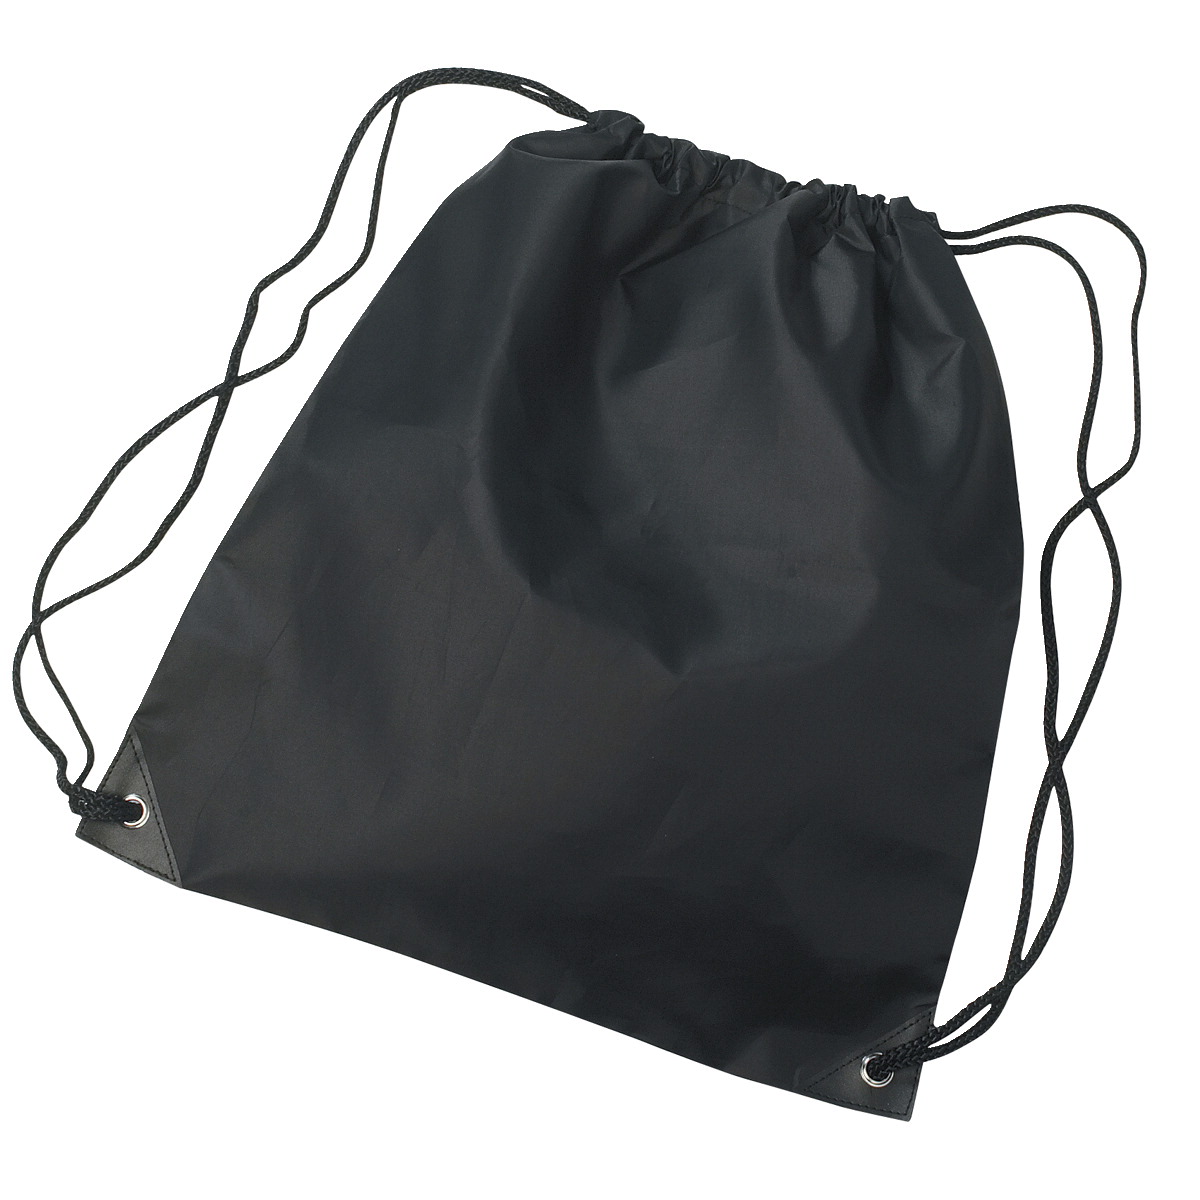 1559570 14 X 18 In. Sports Pack, Polyester & Leather - Black